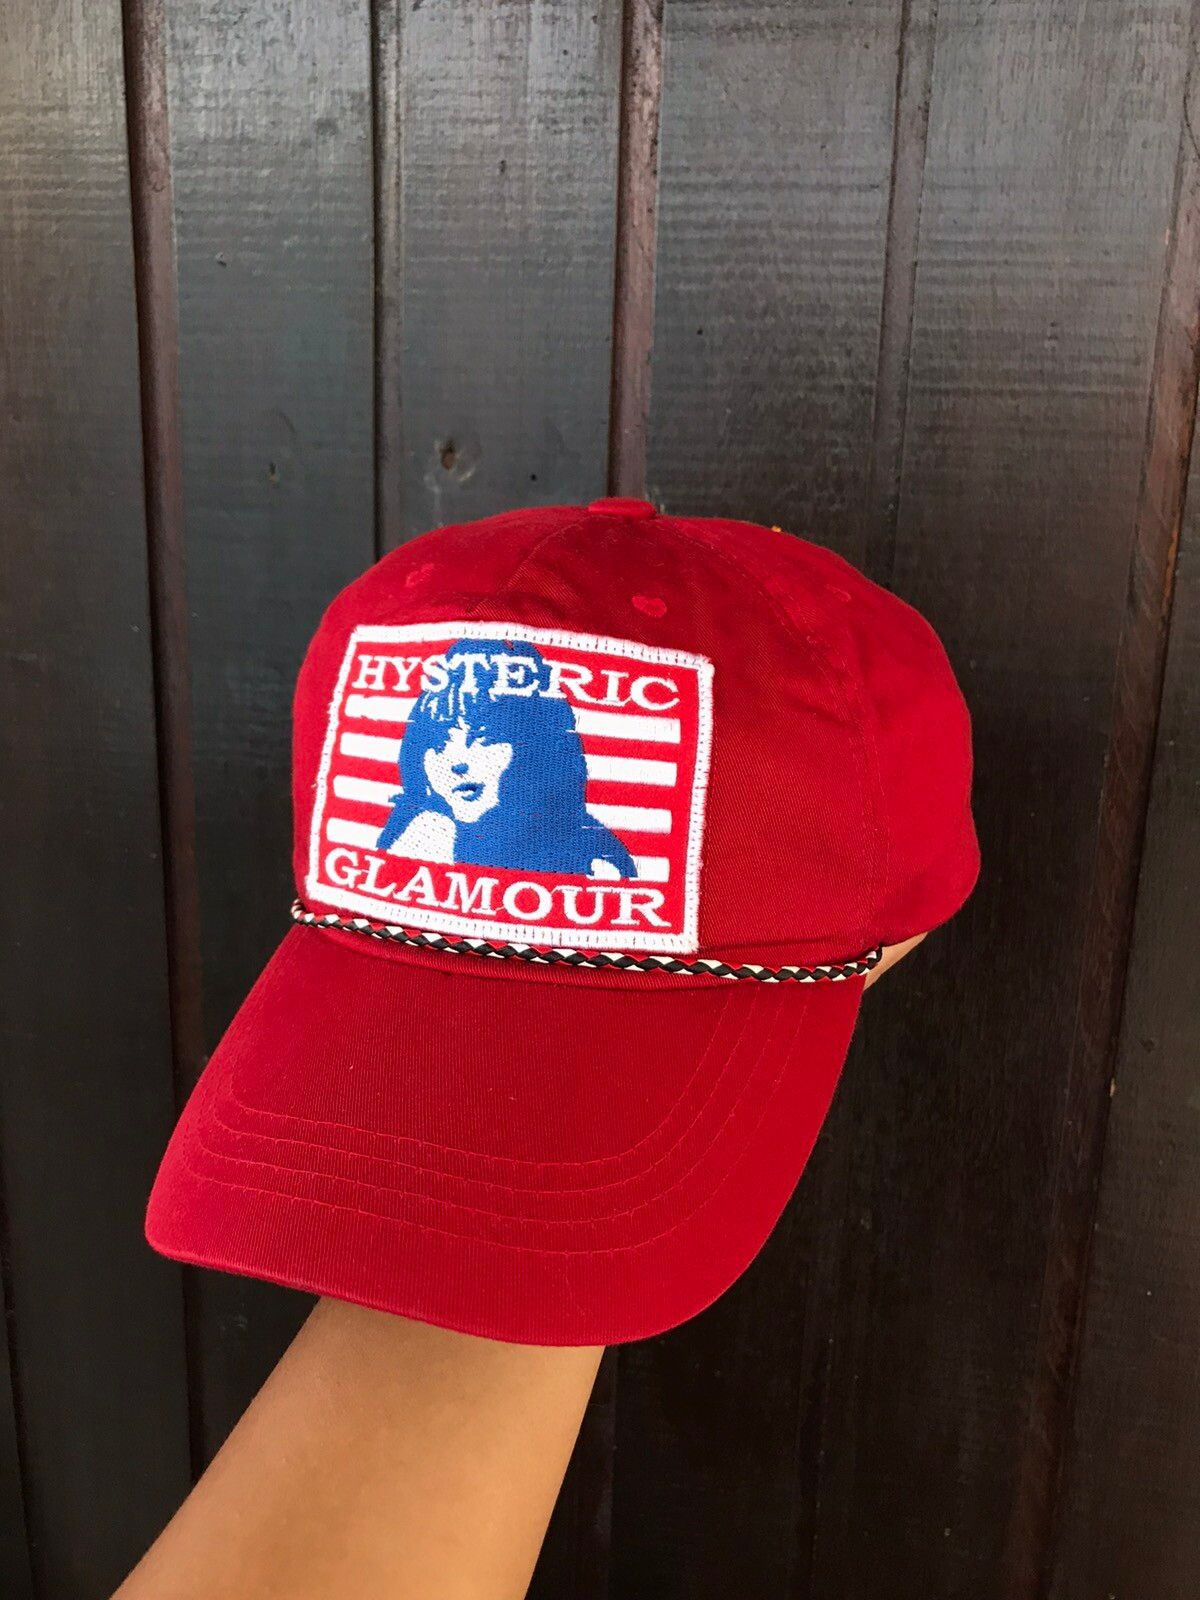 Hysteric Glamour Hysteric Glamour cap | Grailed